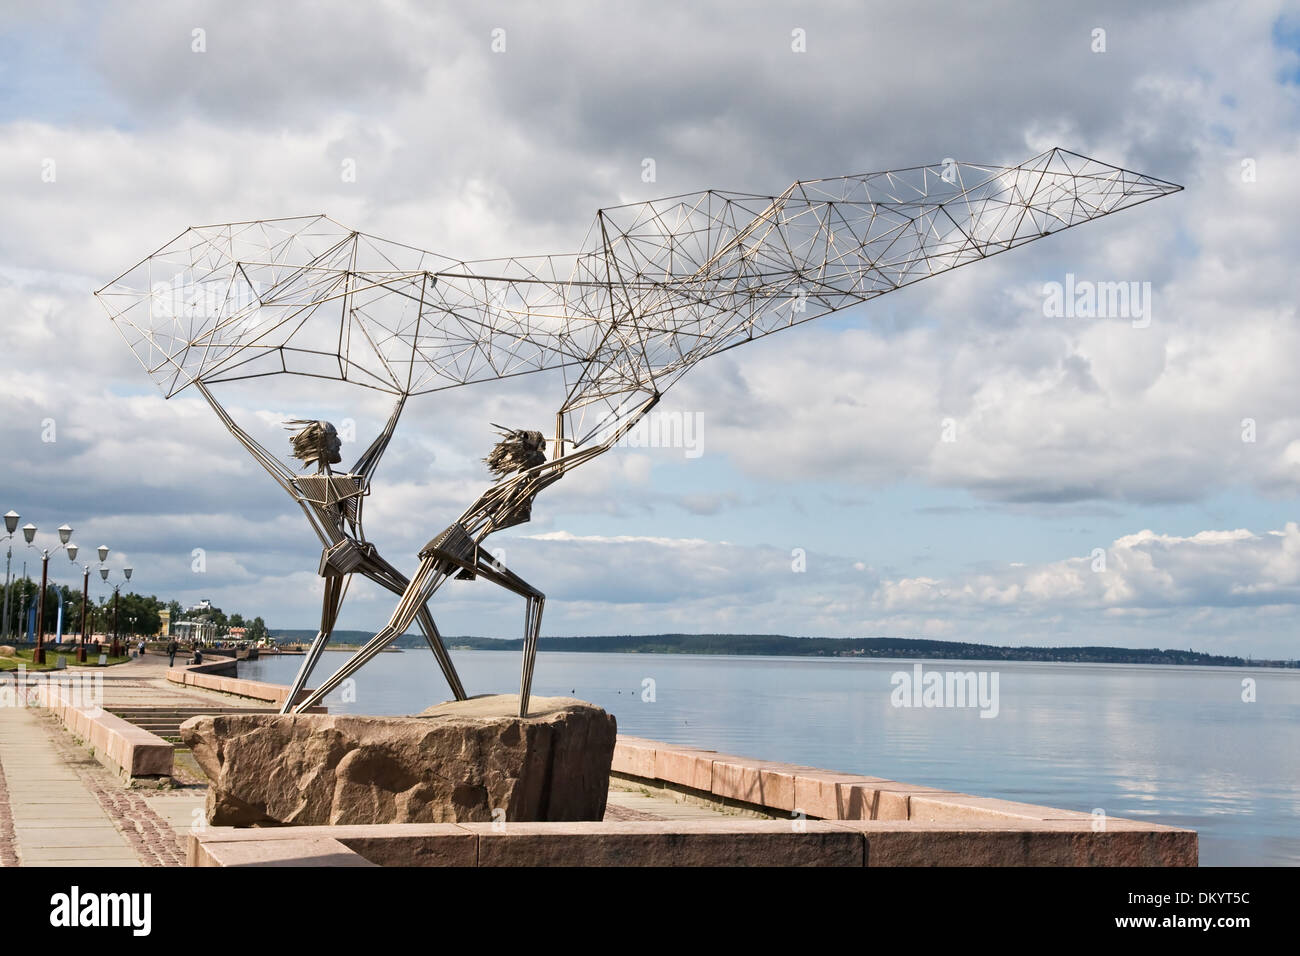 Sculpture of fishers in Petrozavodsk, Karelia, northern Russia Stock Photo